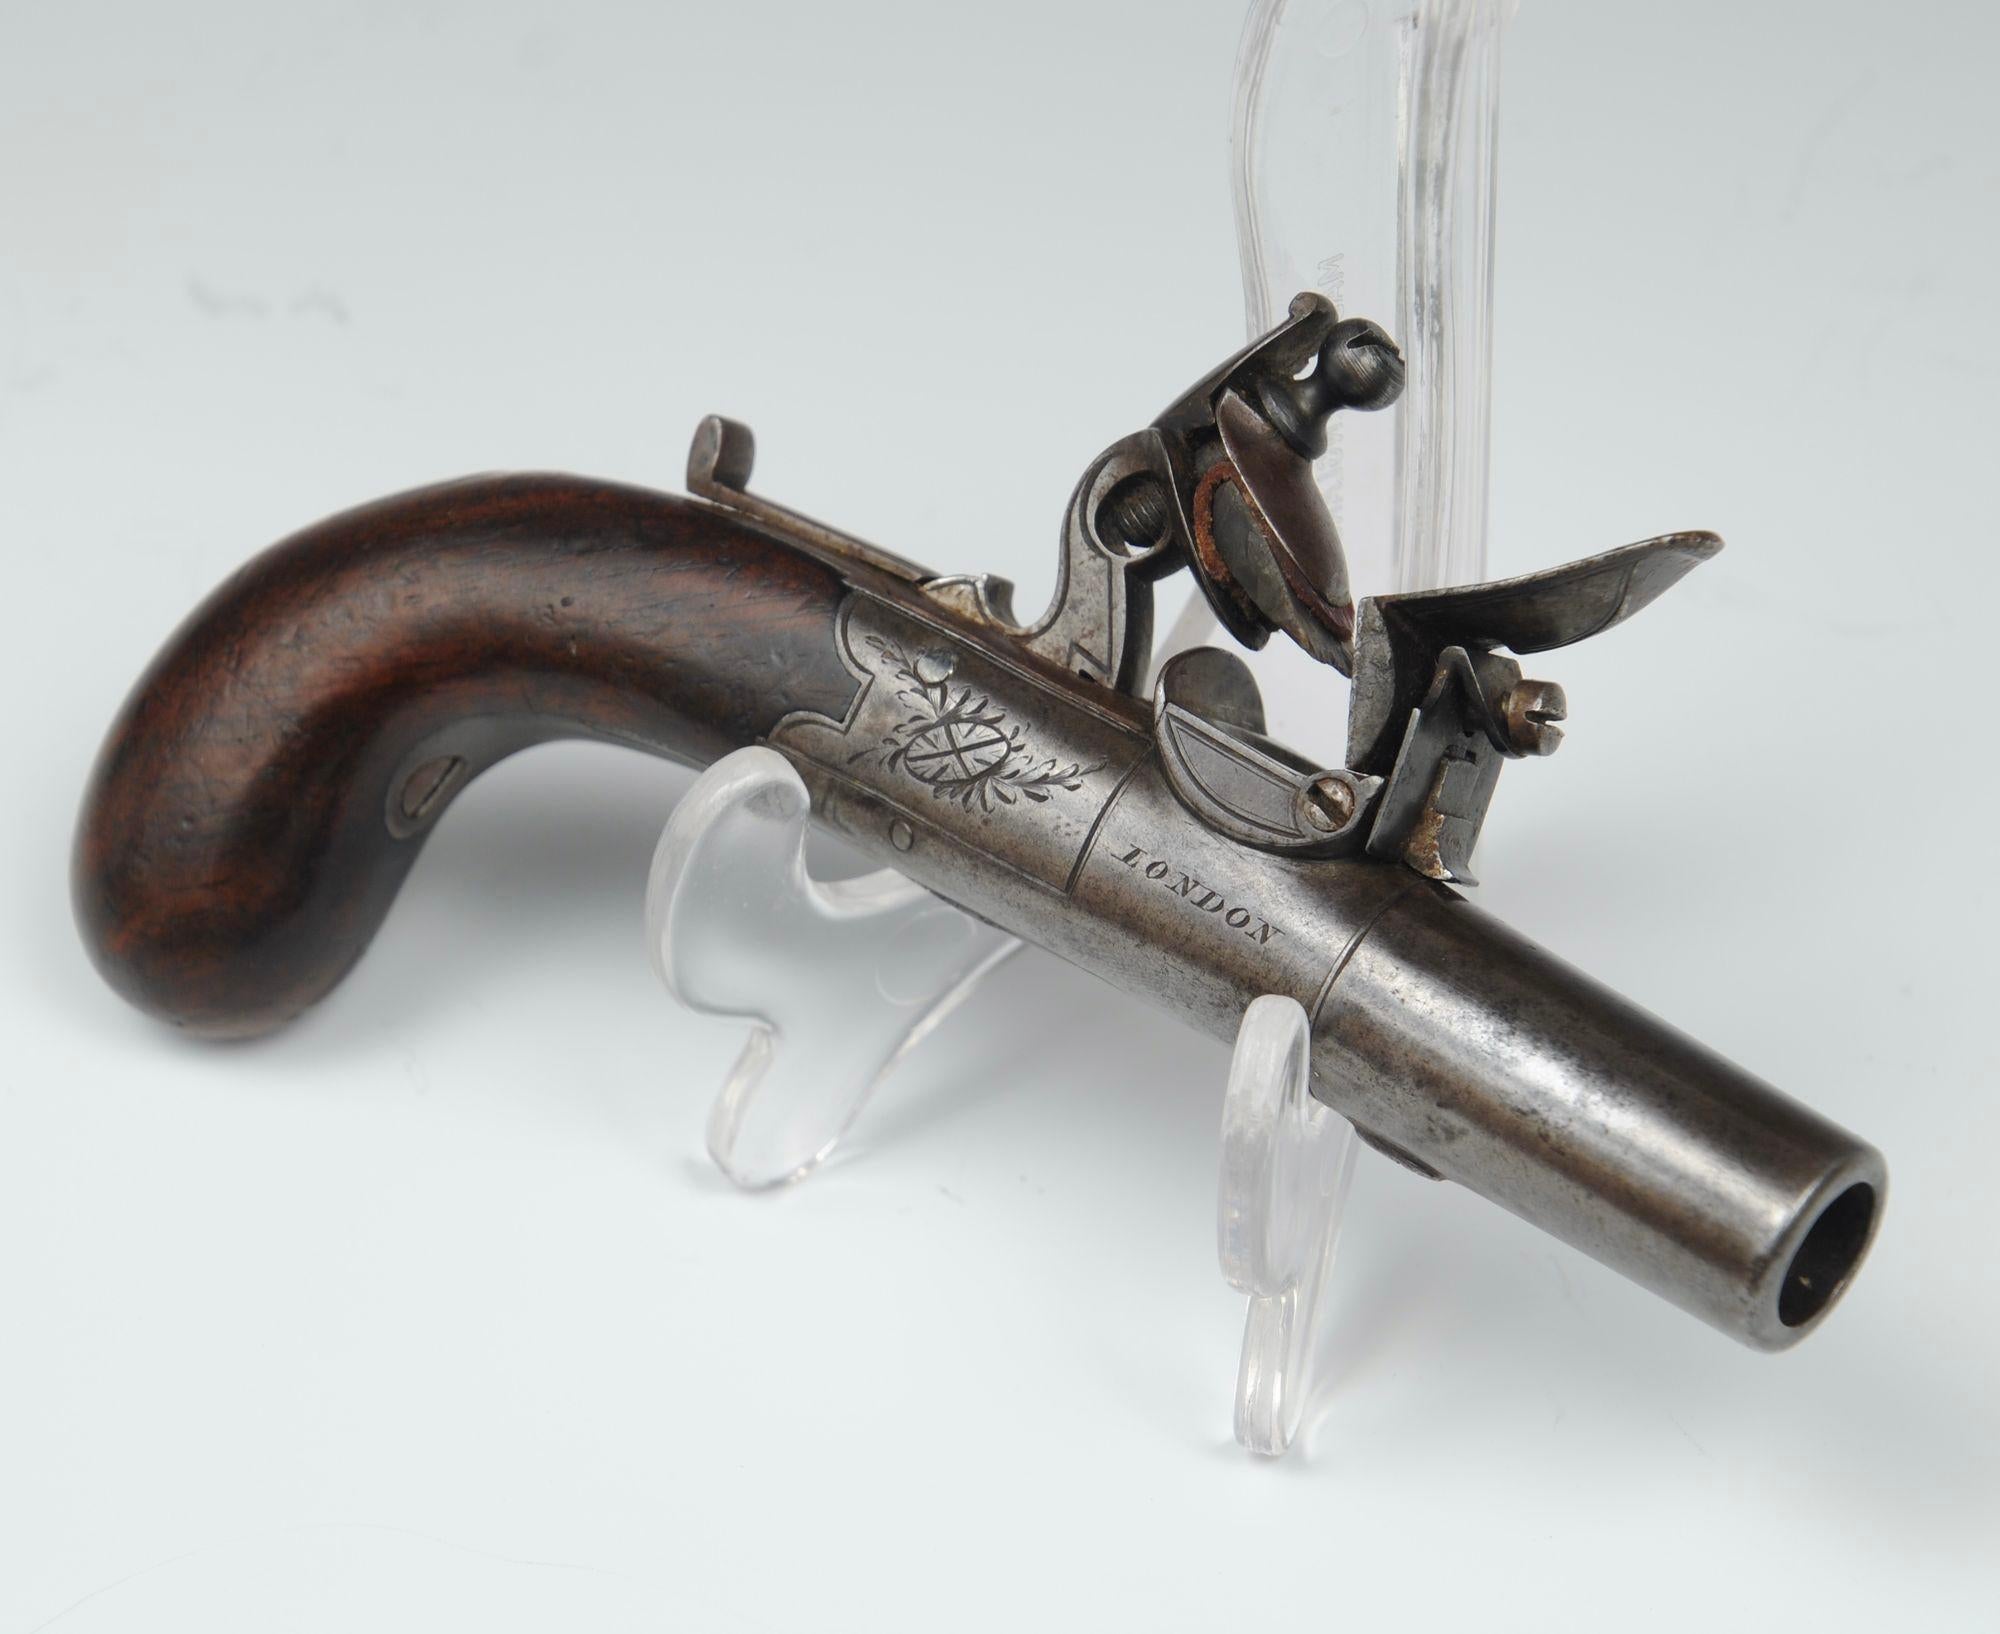 A late 18th century pocket pistol with hidden trigger and box lock by Lacy and Witton, London.
Barrel length 7cm, overall length 20cm